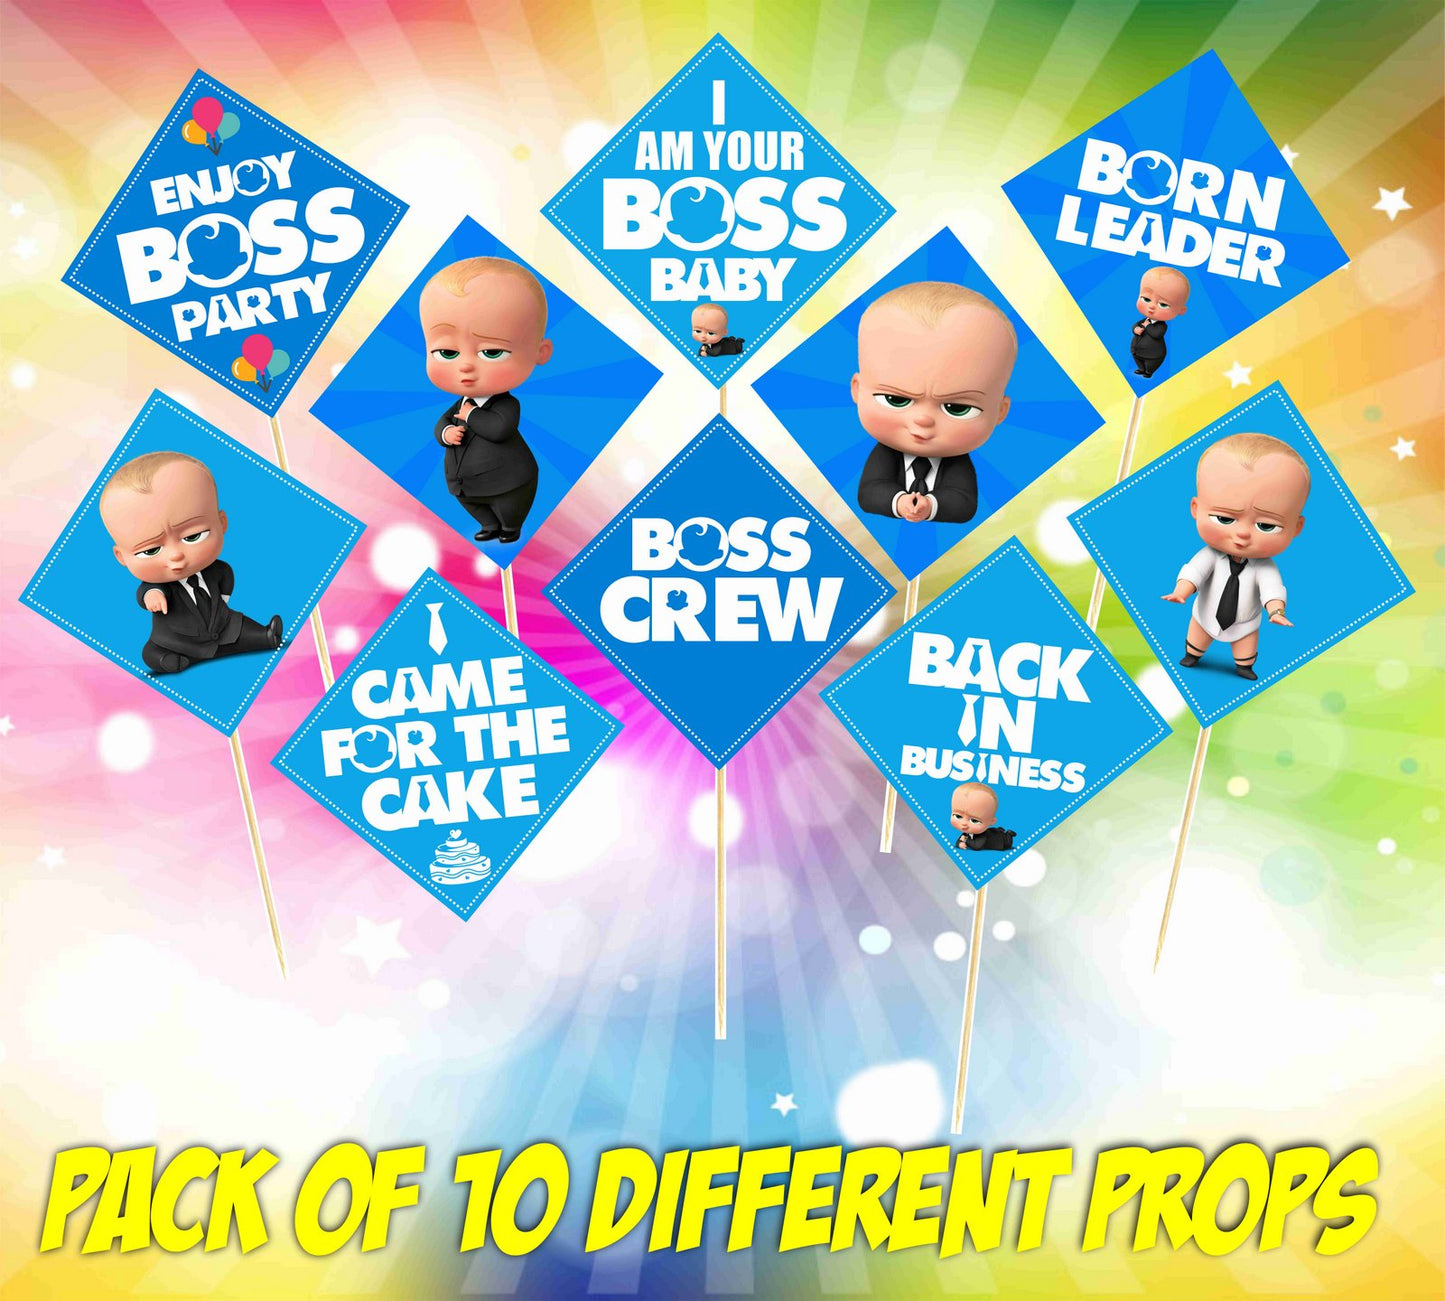 Boss Baby Birthday Photo Booth Party Props Theme Birthday Party Decoration, Birthday Photo Booth Party Item for Adults and Kids